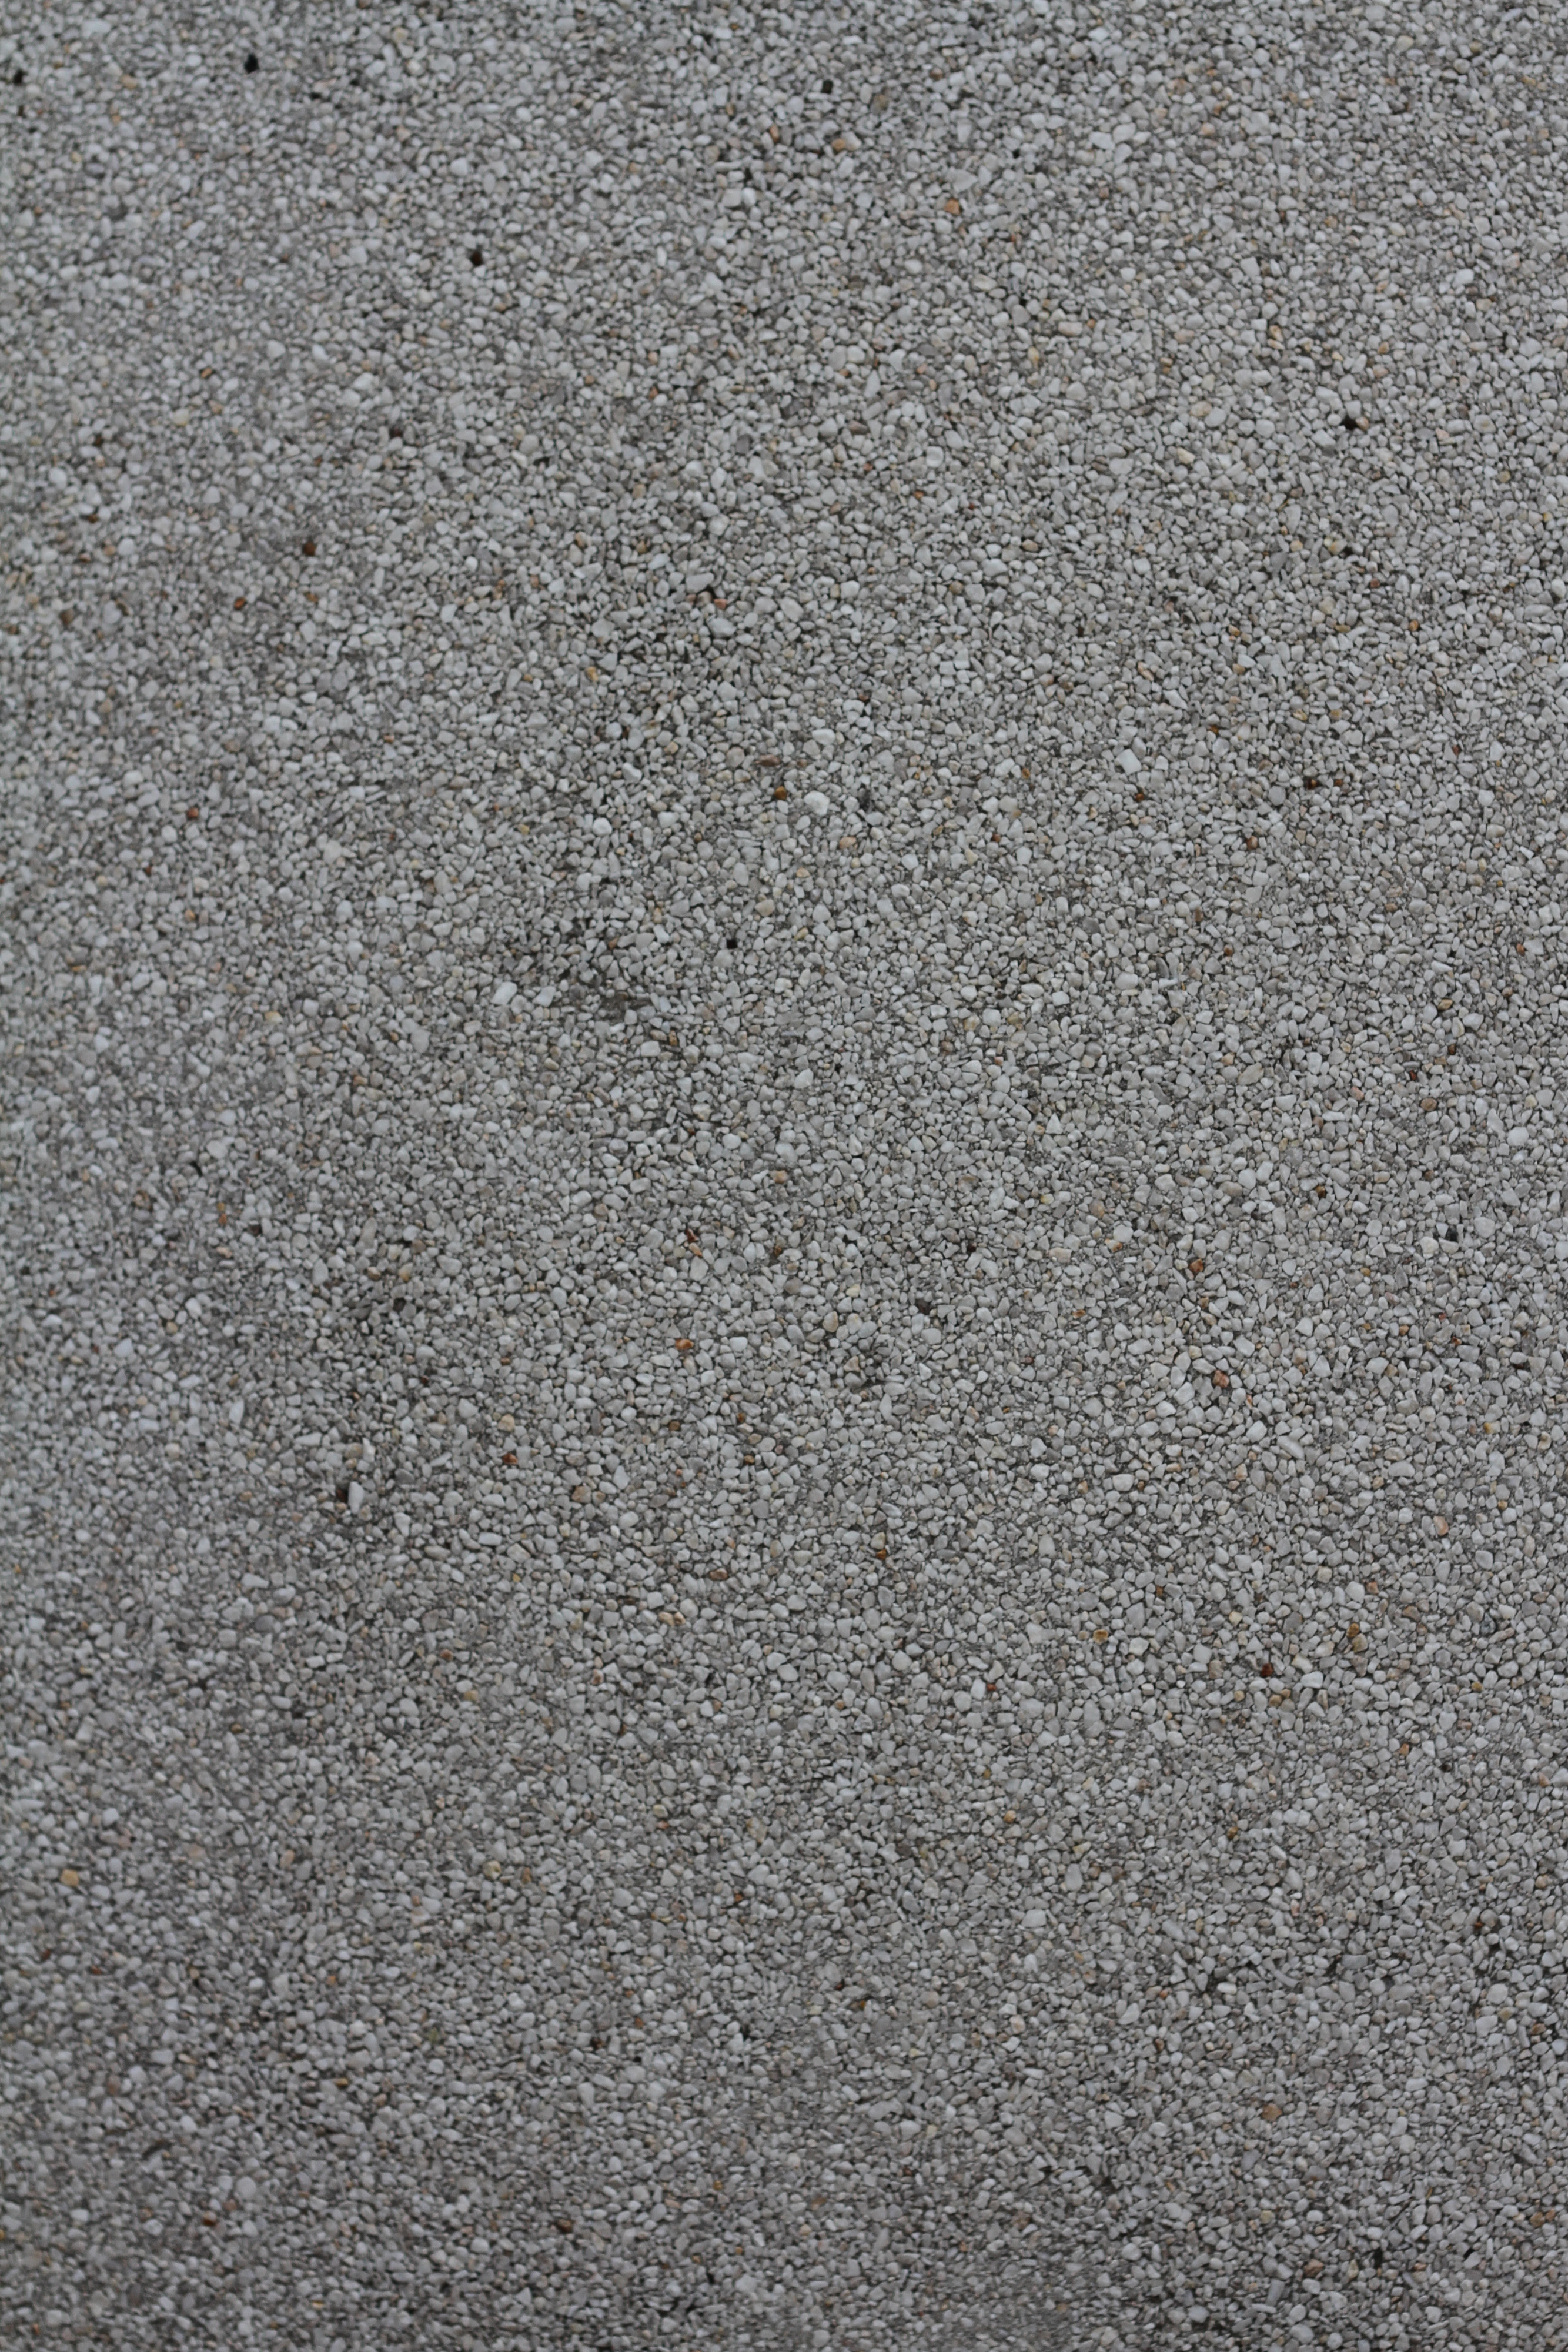 Gray Pebble Surface Texture - 14Textures